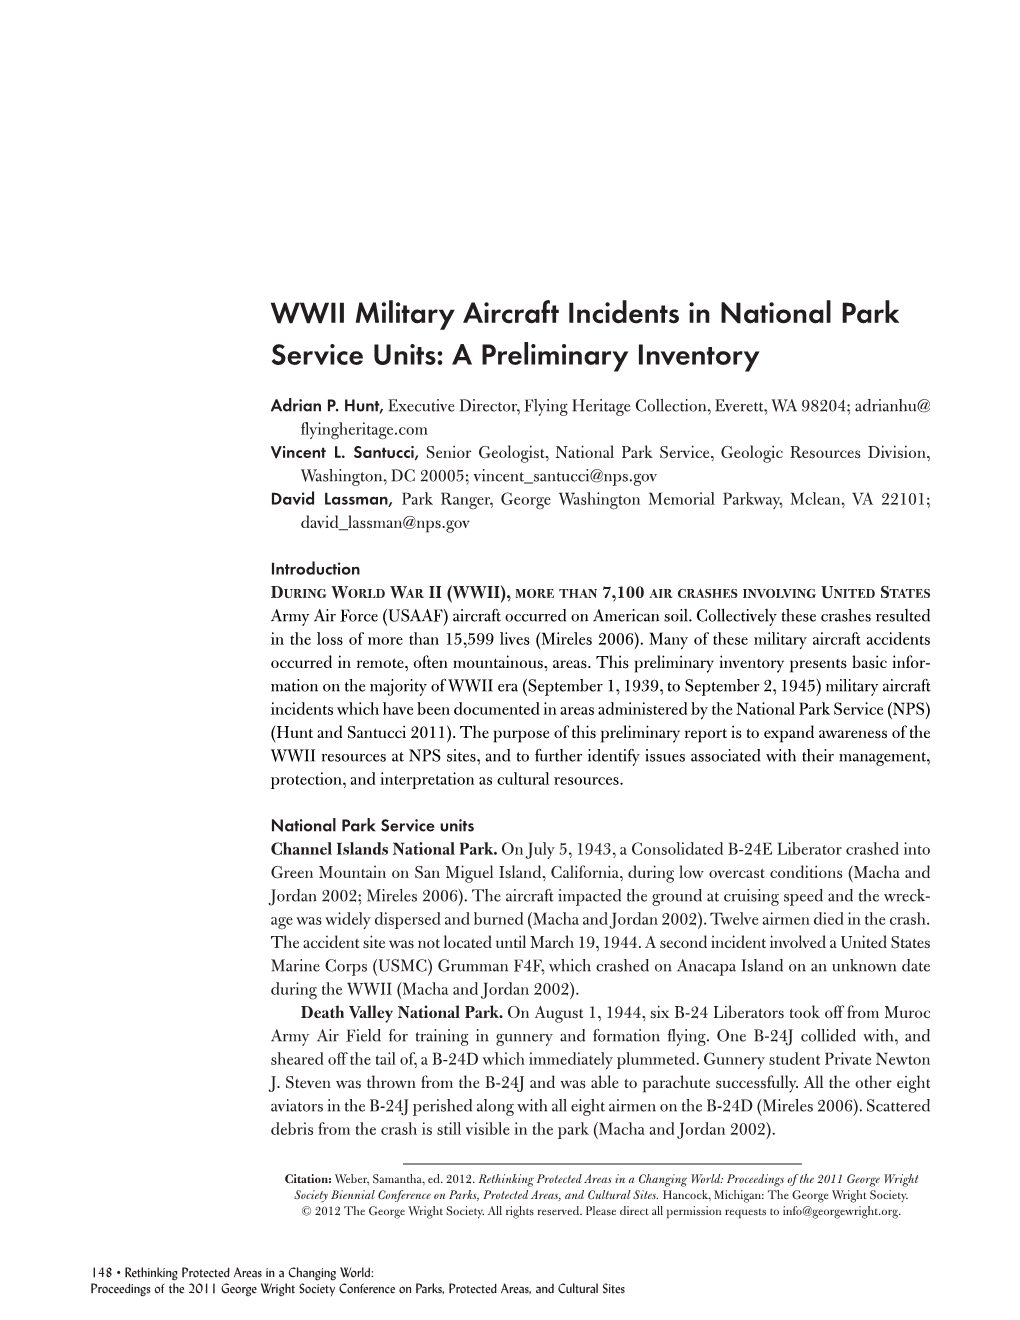 WWII Military Aircraft Incidents in National Park Service Units: a Preliminary Inventory